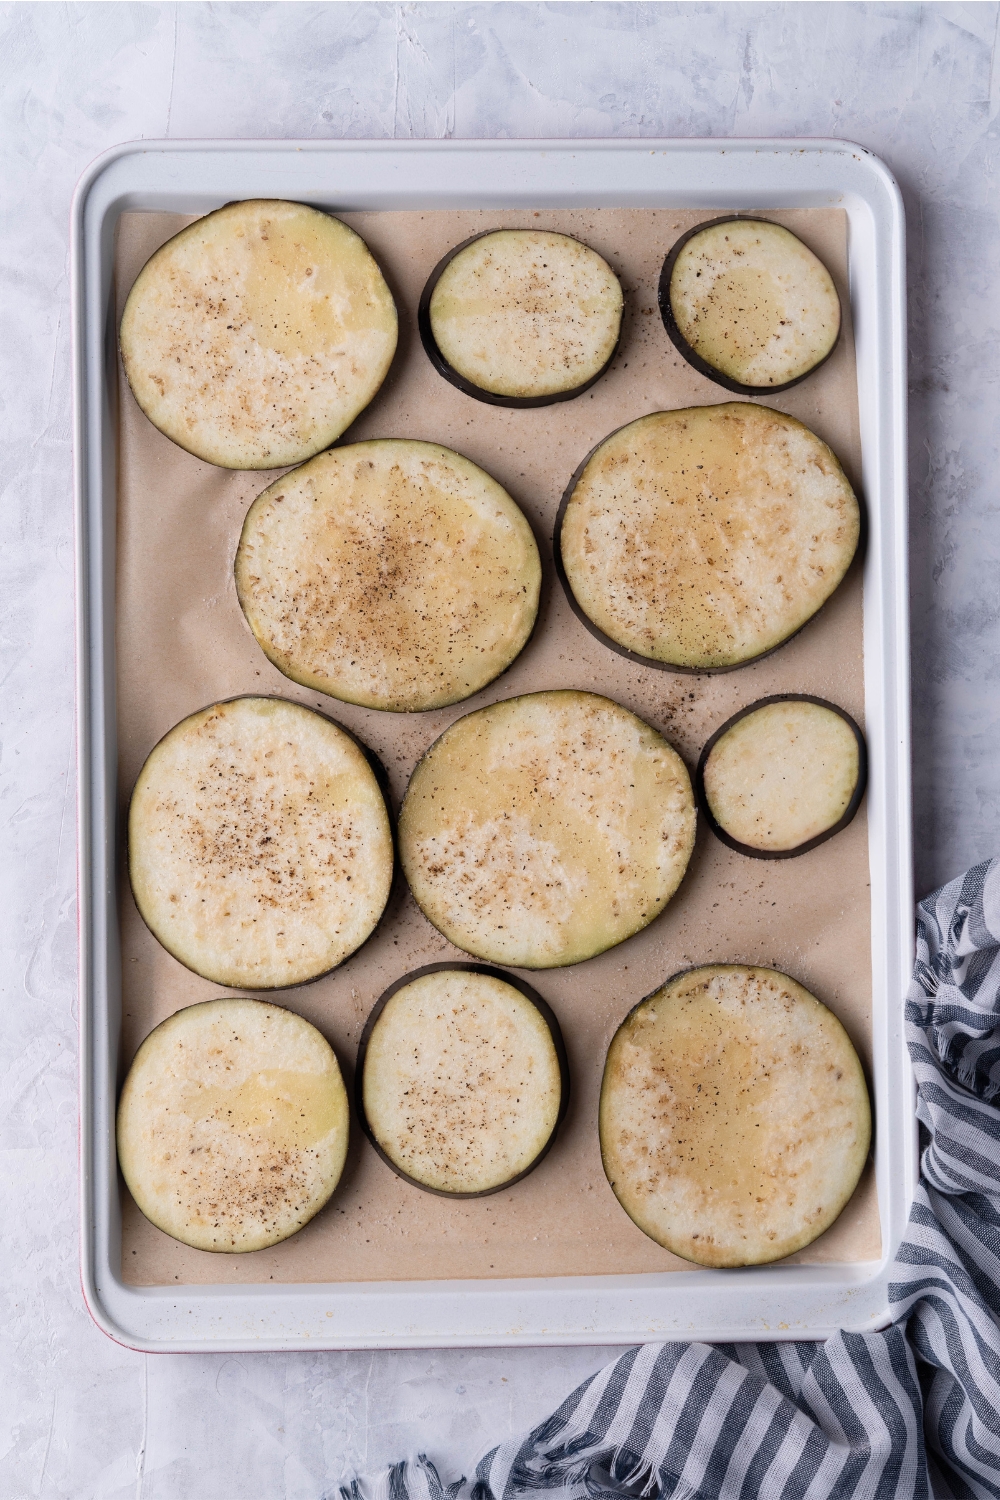 Ten seasoned eggplant slices on a sheet of parchment paper on a baking tray.